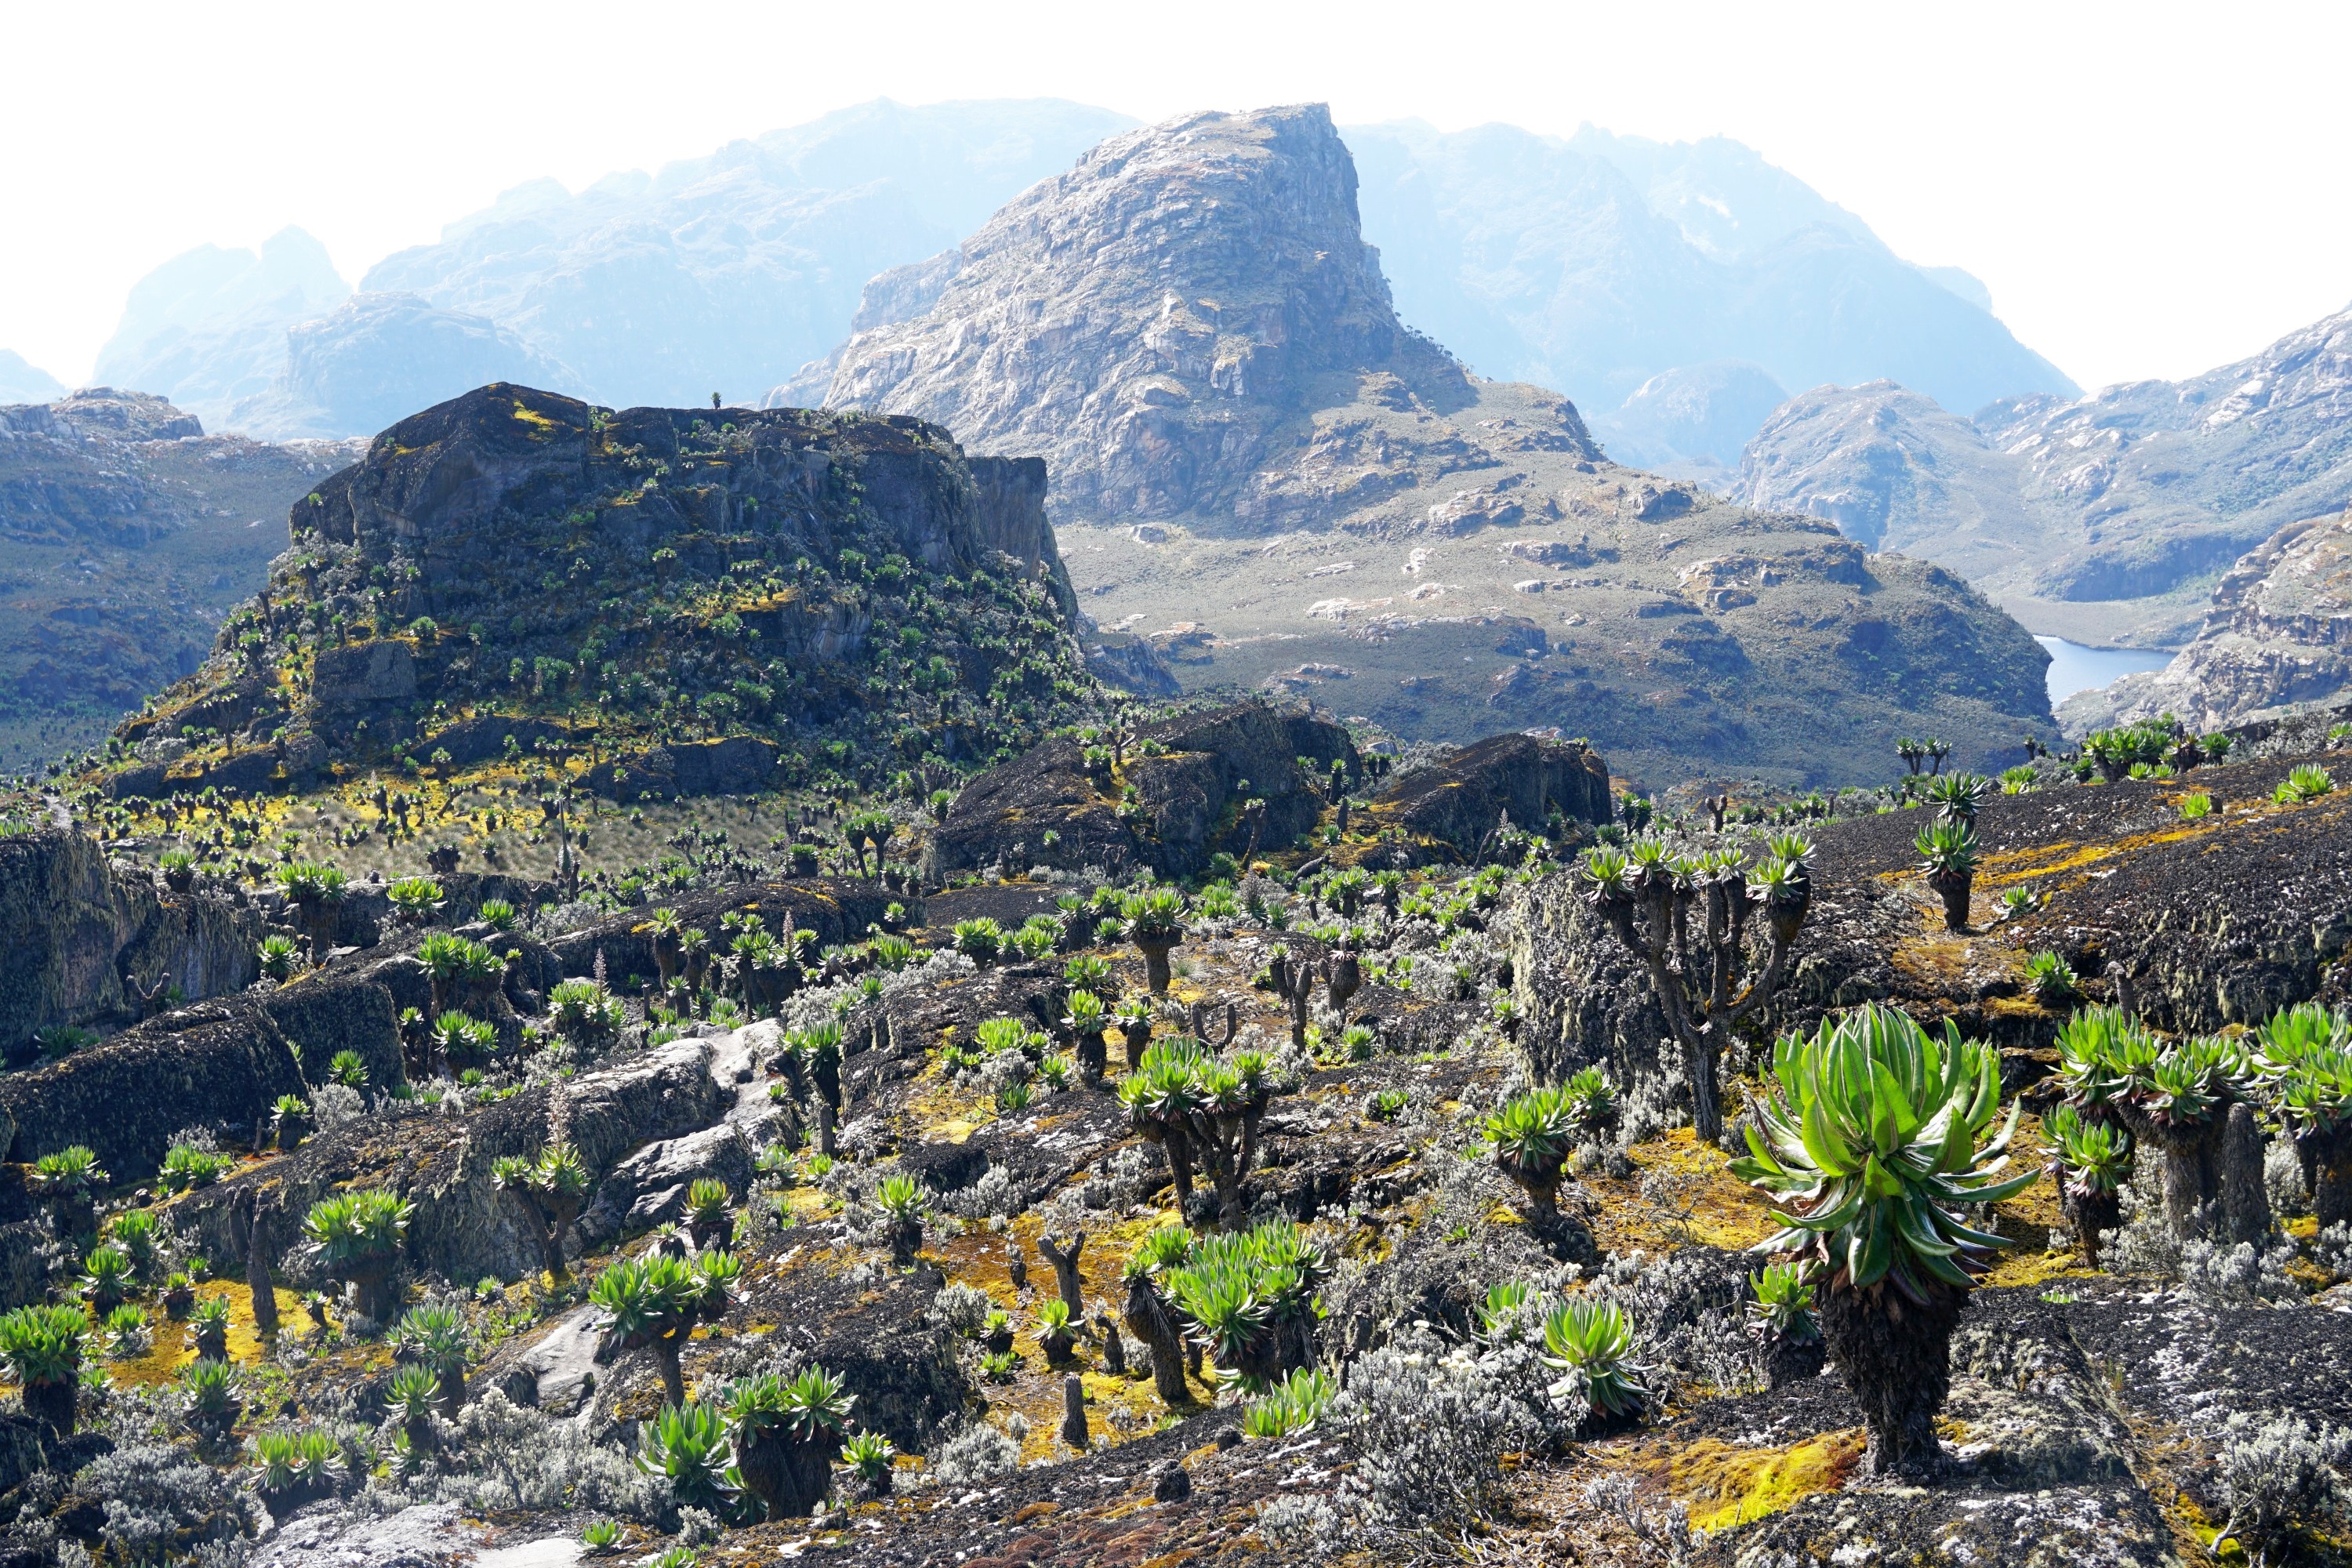 Things learnt hiking in the Rwenzori Mountains